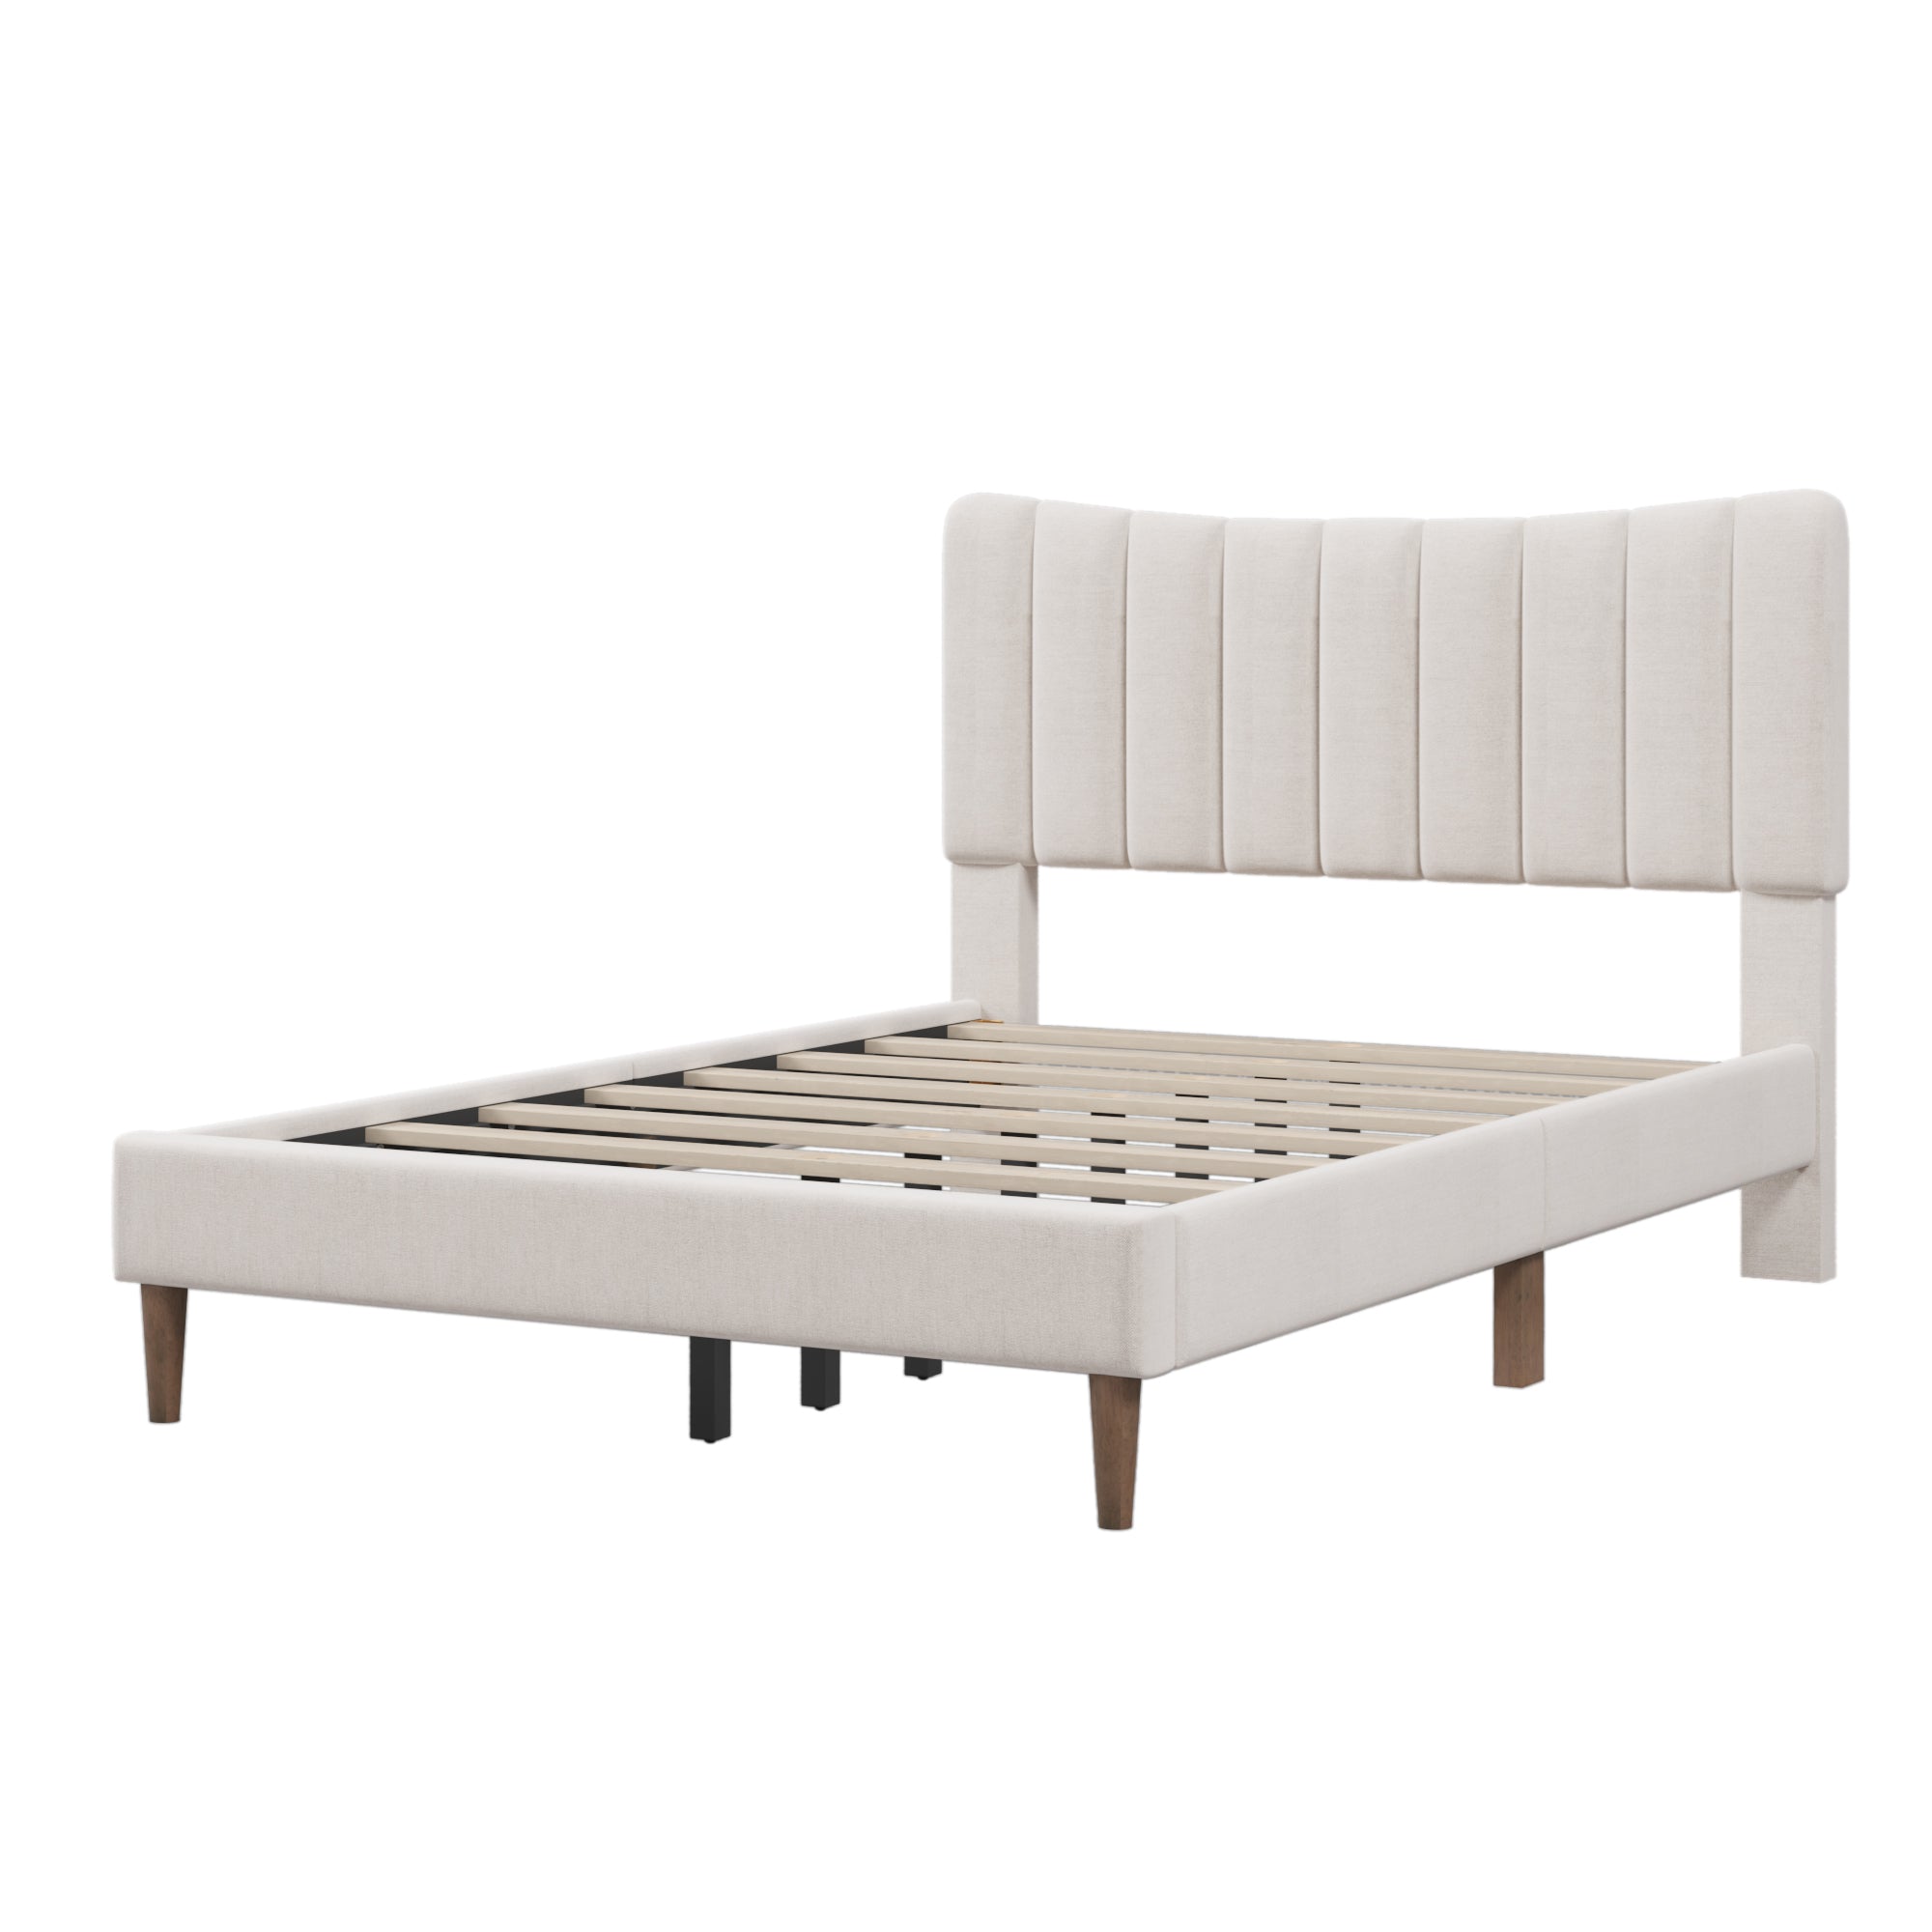 Full Bed - Upholstered Platform Bed Frame with Vertical Channel Tufted Headboard, No Box Spring Needed - Cream